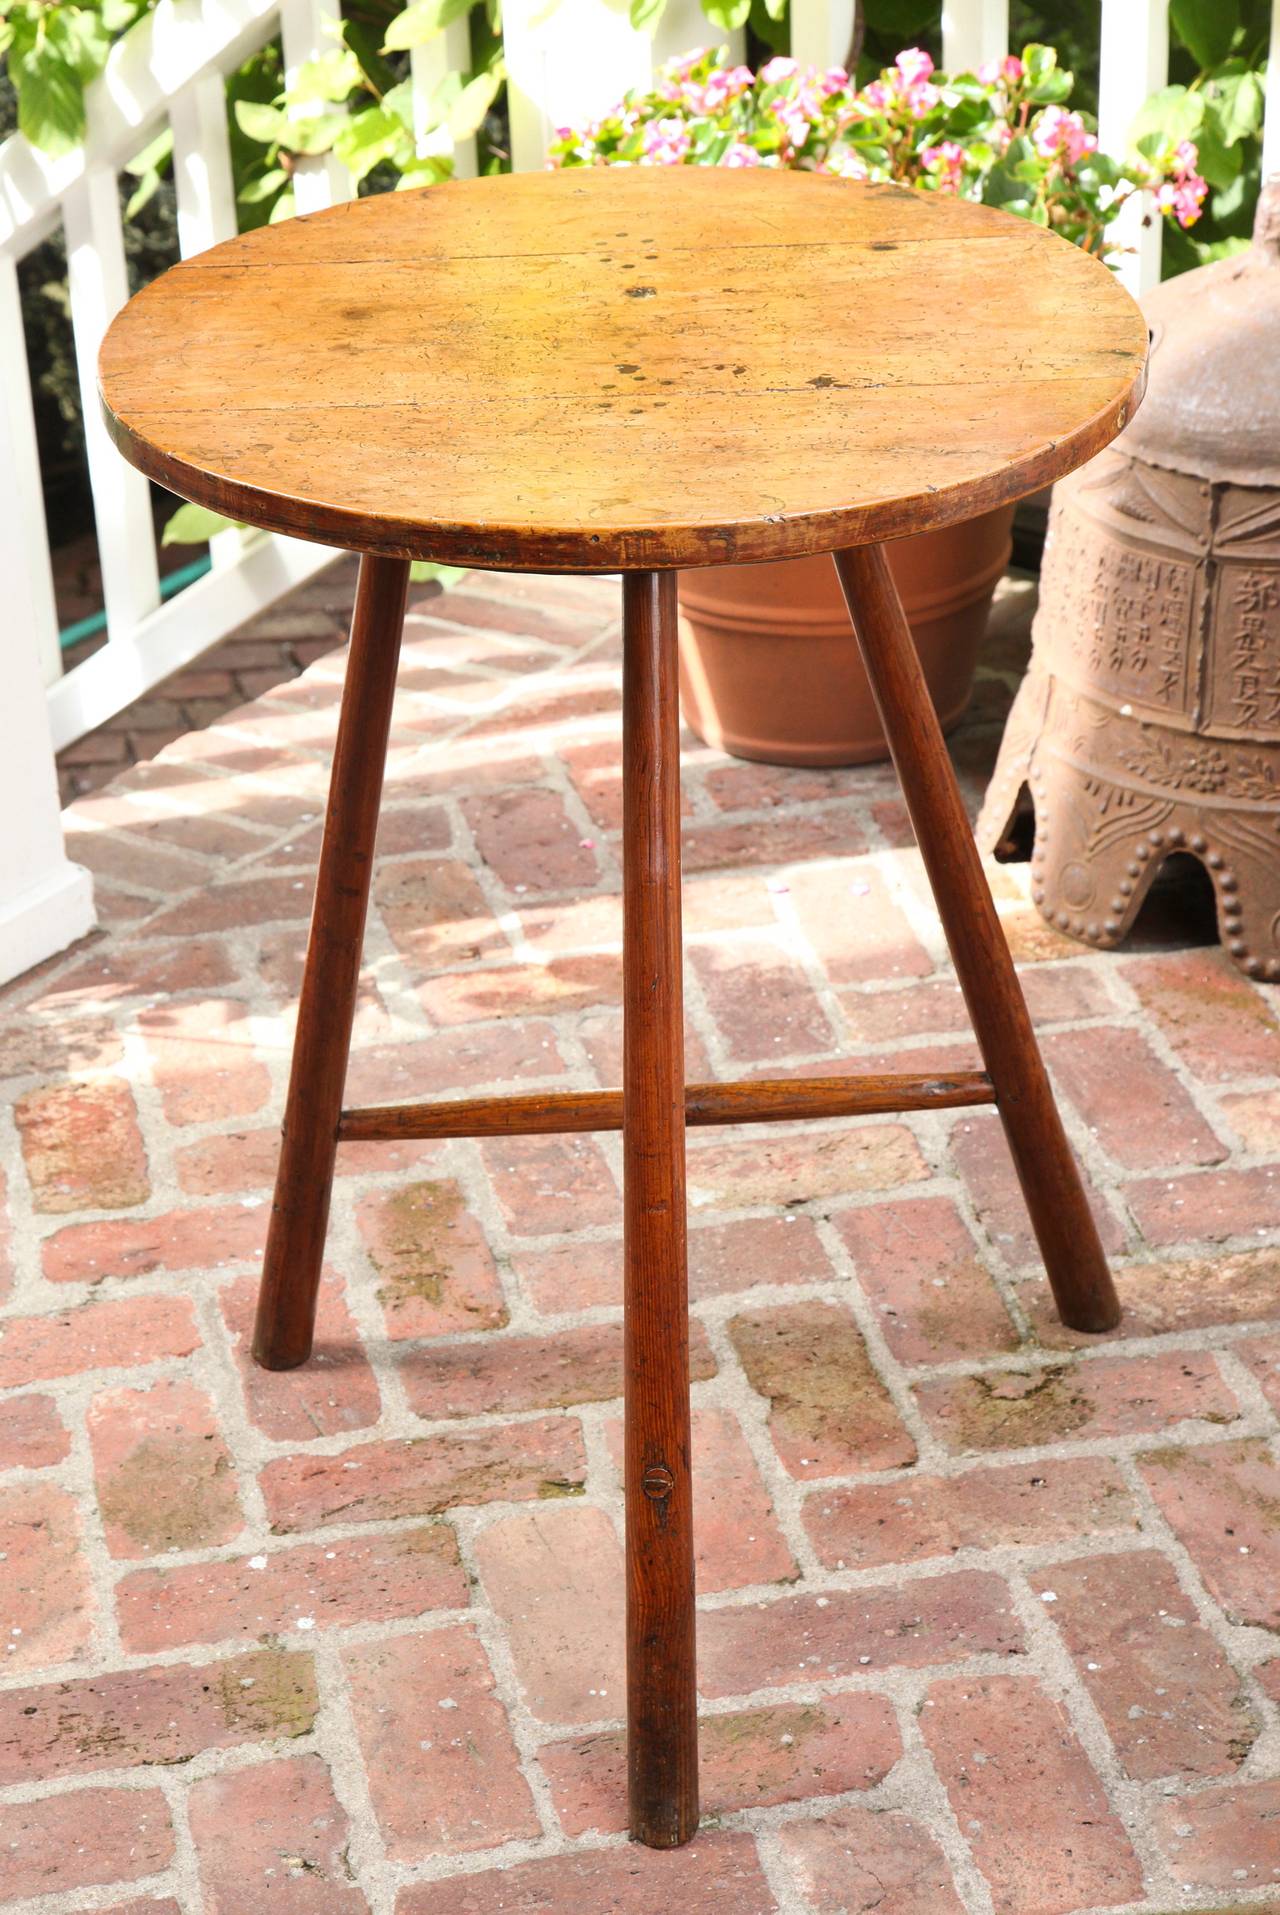 Country Circular Maple/Ash Cheese Board Table, English or Welsh, circa 1750 In Stock For Sale